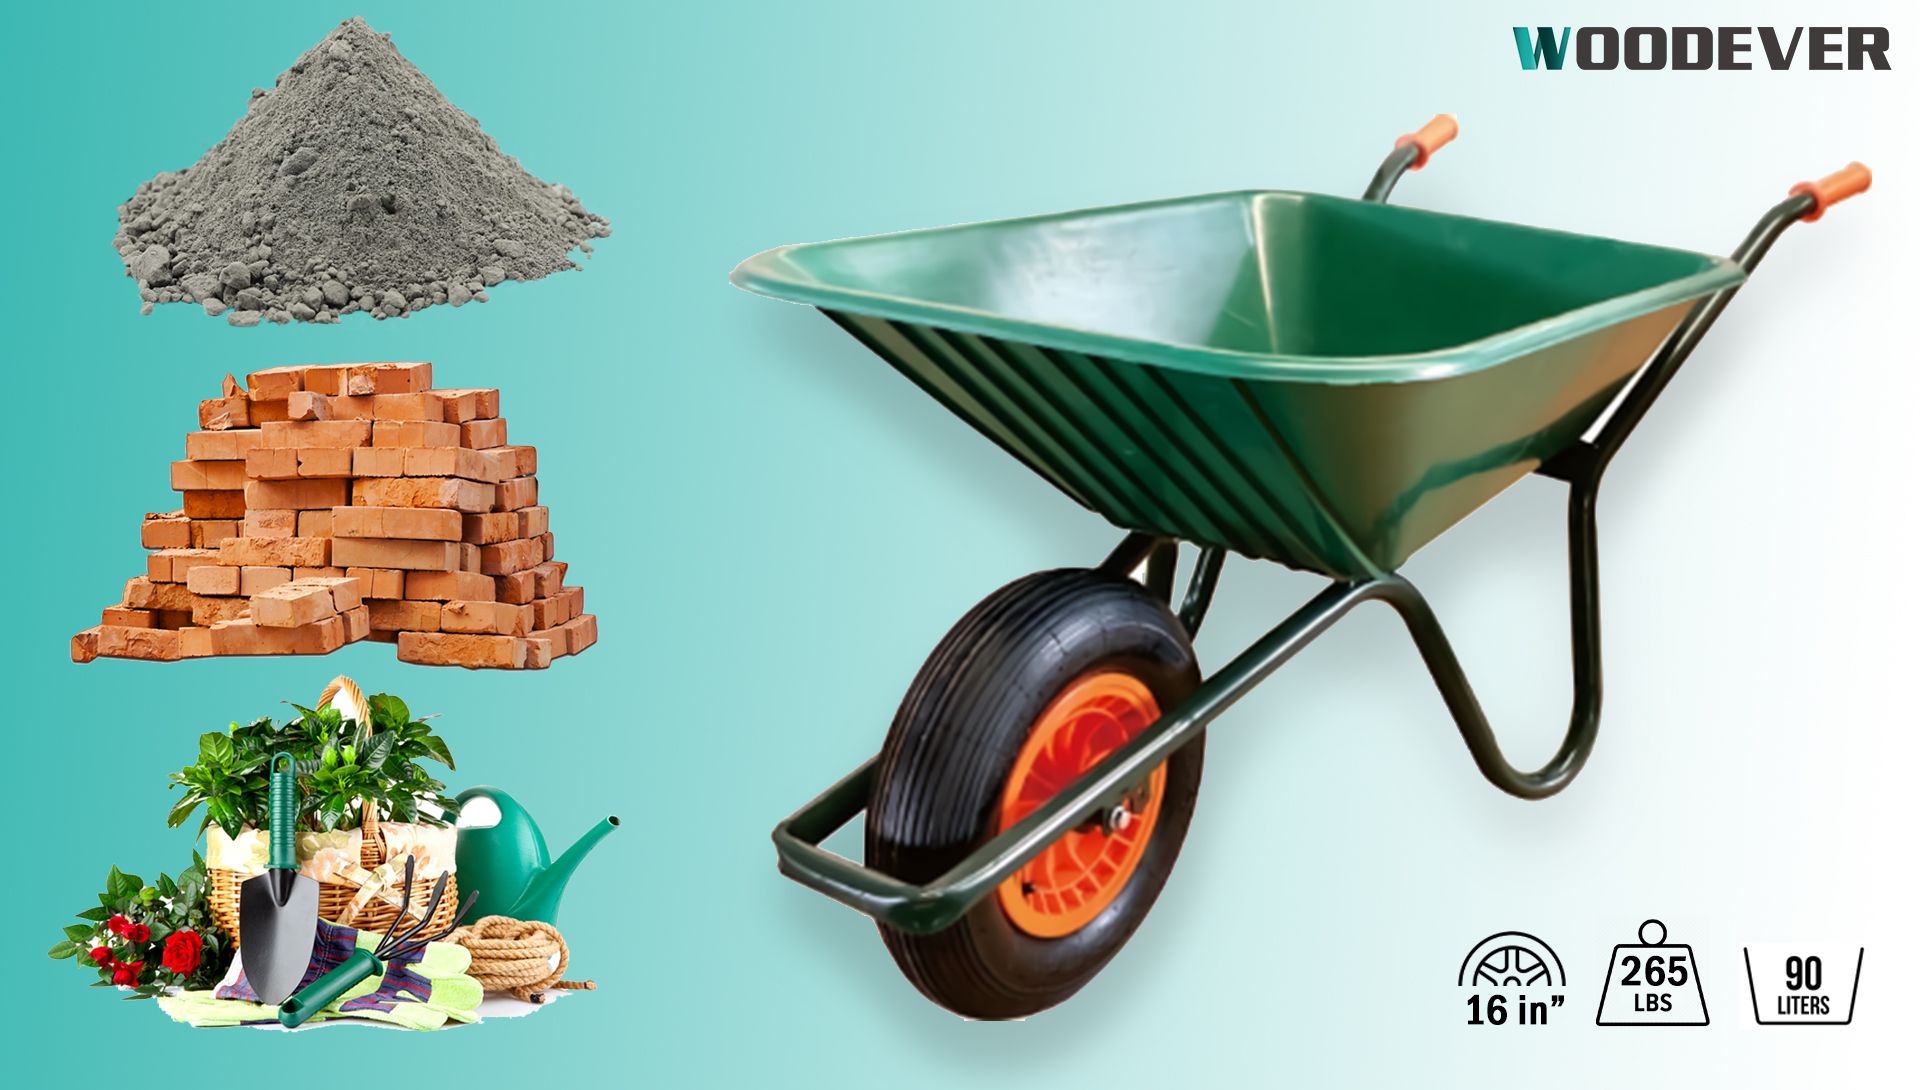 The best wheelbarrow for gardening and farming work is a combination of rigid PP plastic and a strong galvanized steel frame.